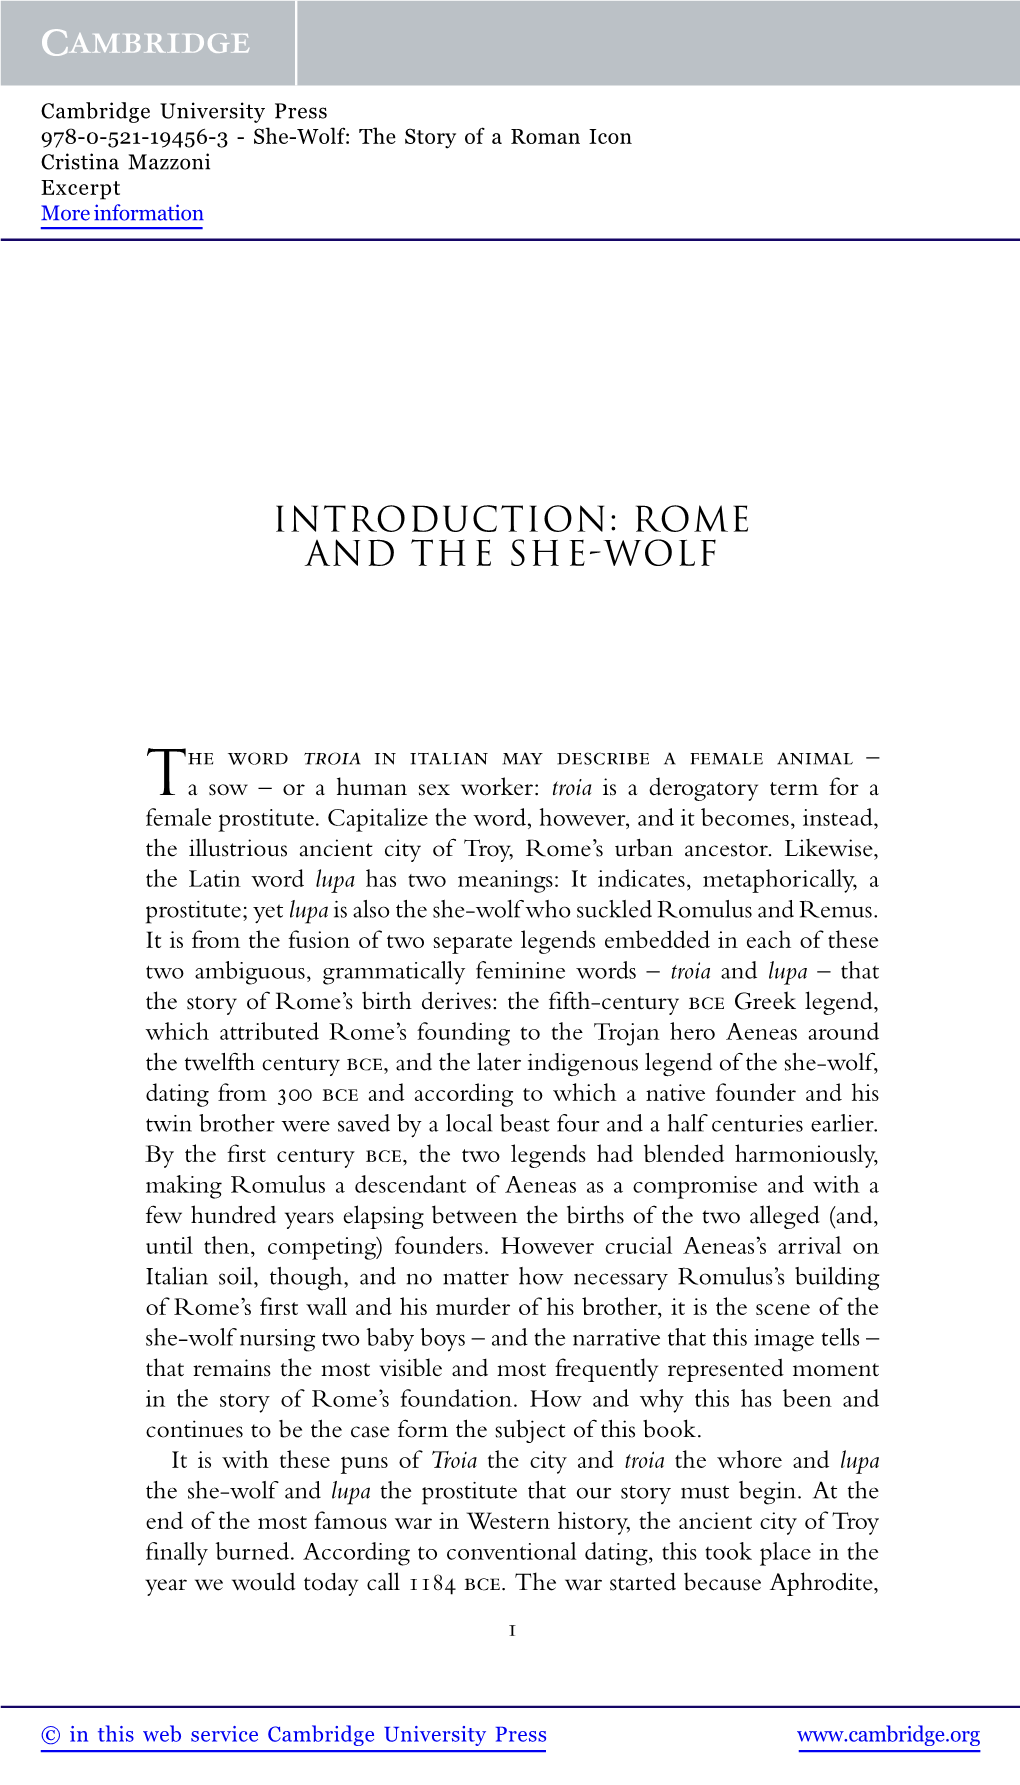 Rome and the She-Wolf